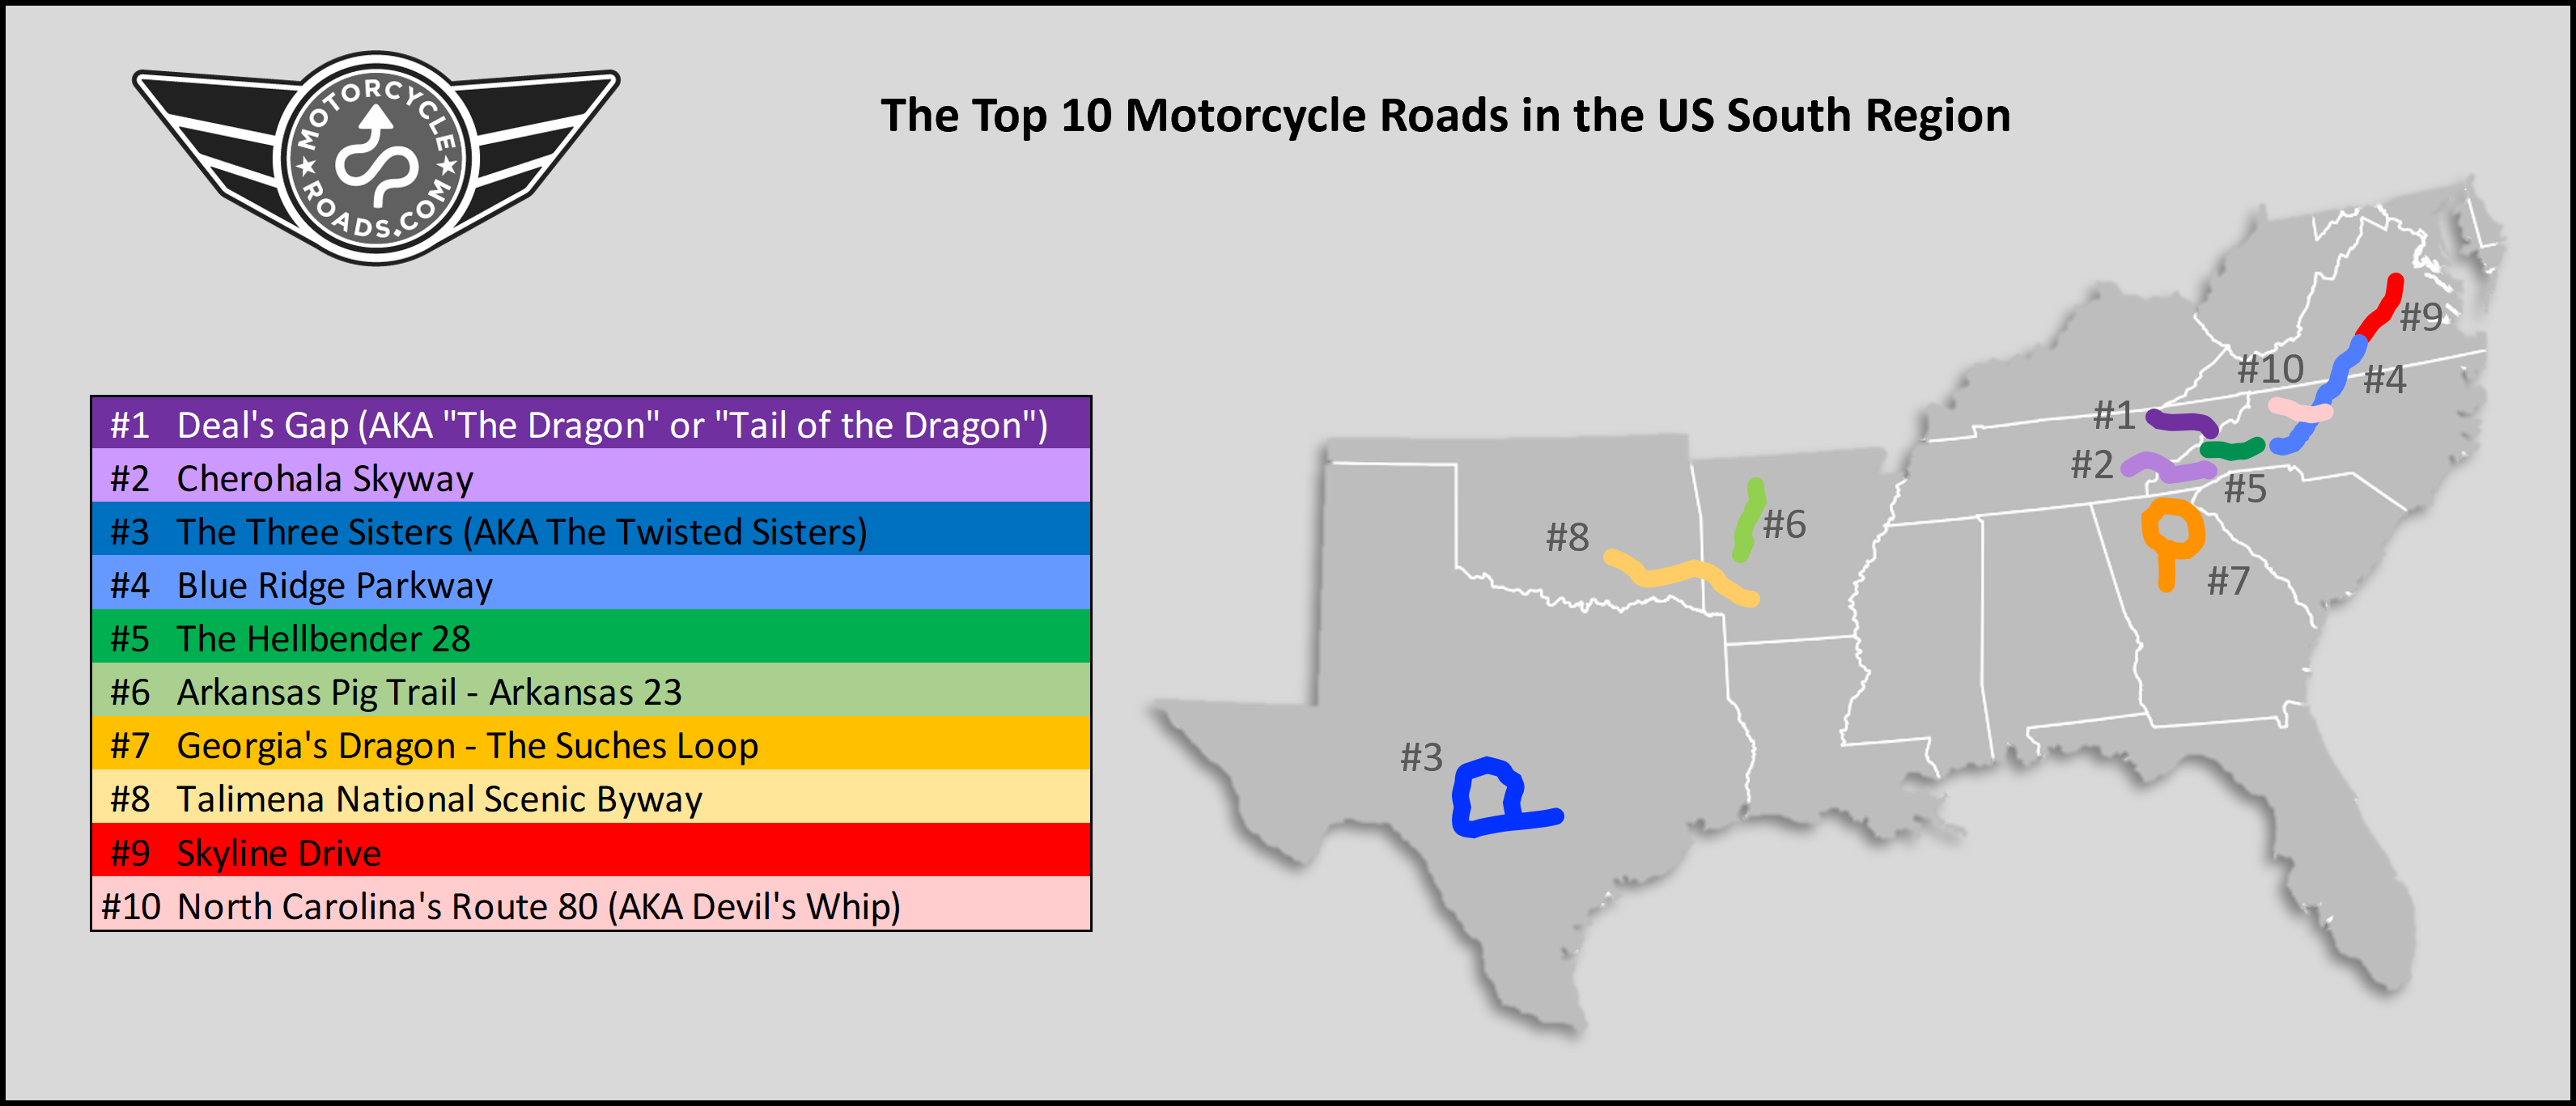 Map of the Top 10 Motorcycle Roads in the South